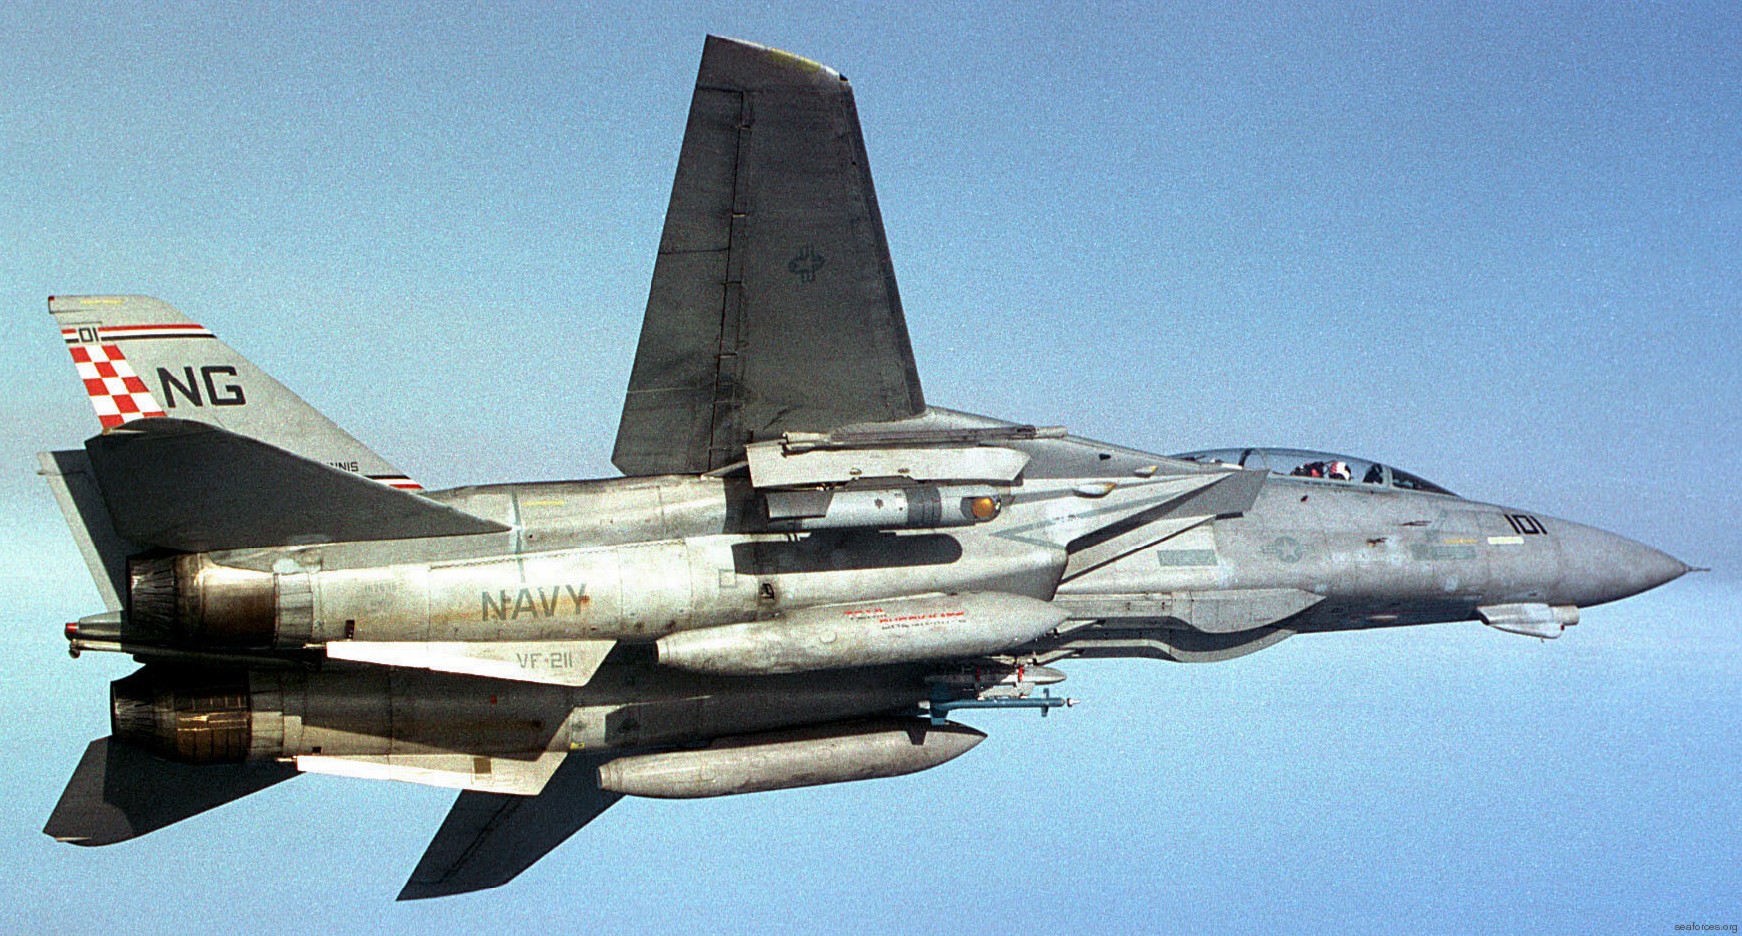 vf-211 fighting checkmates fighter squadron f-14a tomcat us navy carrier air wing cvw-9 uss john c. stennis cvn-74 61